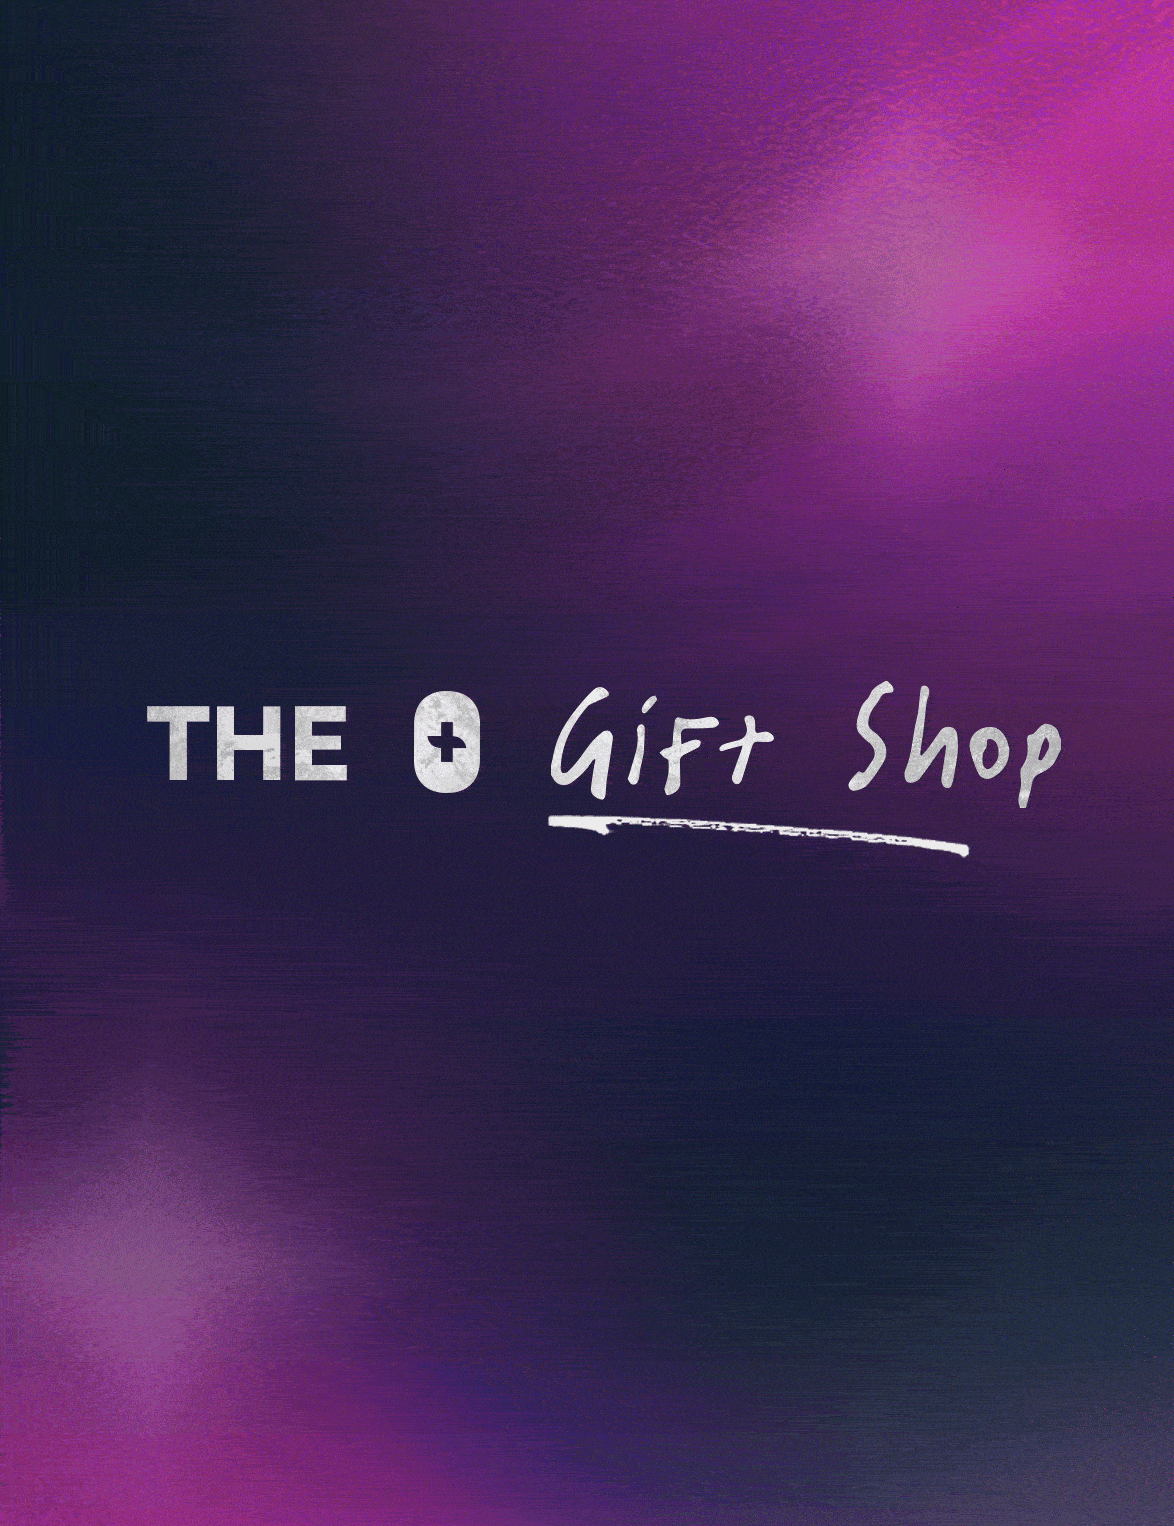 THE FIGS GIFT SHOP: All things cool, colorful and cozy — whatever you need, we got you.